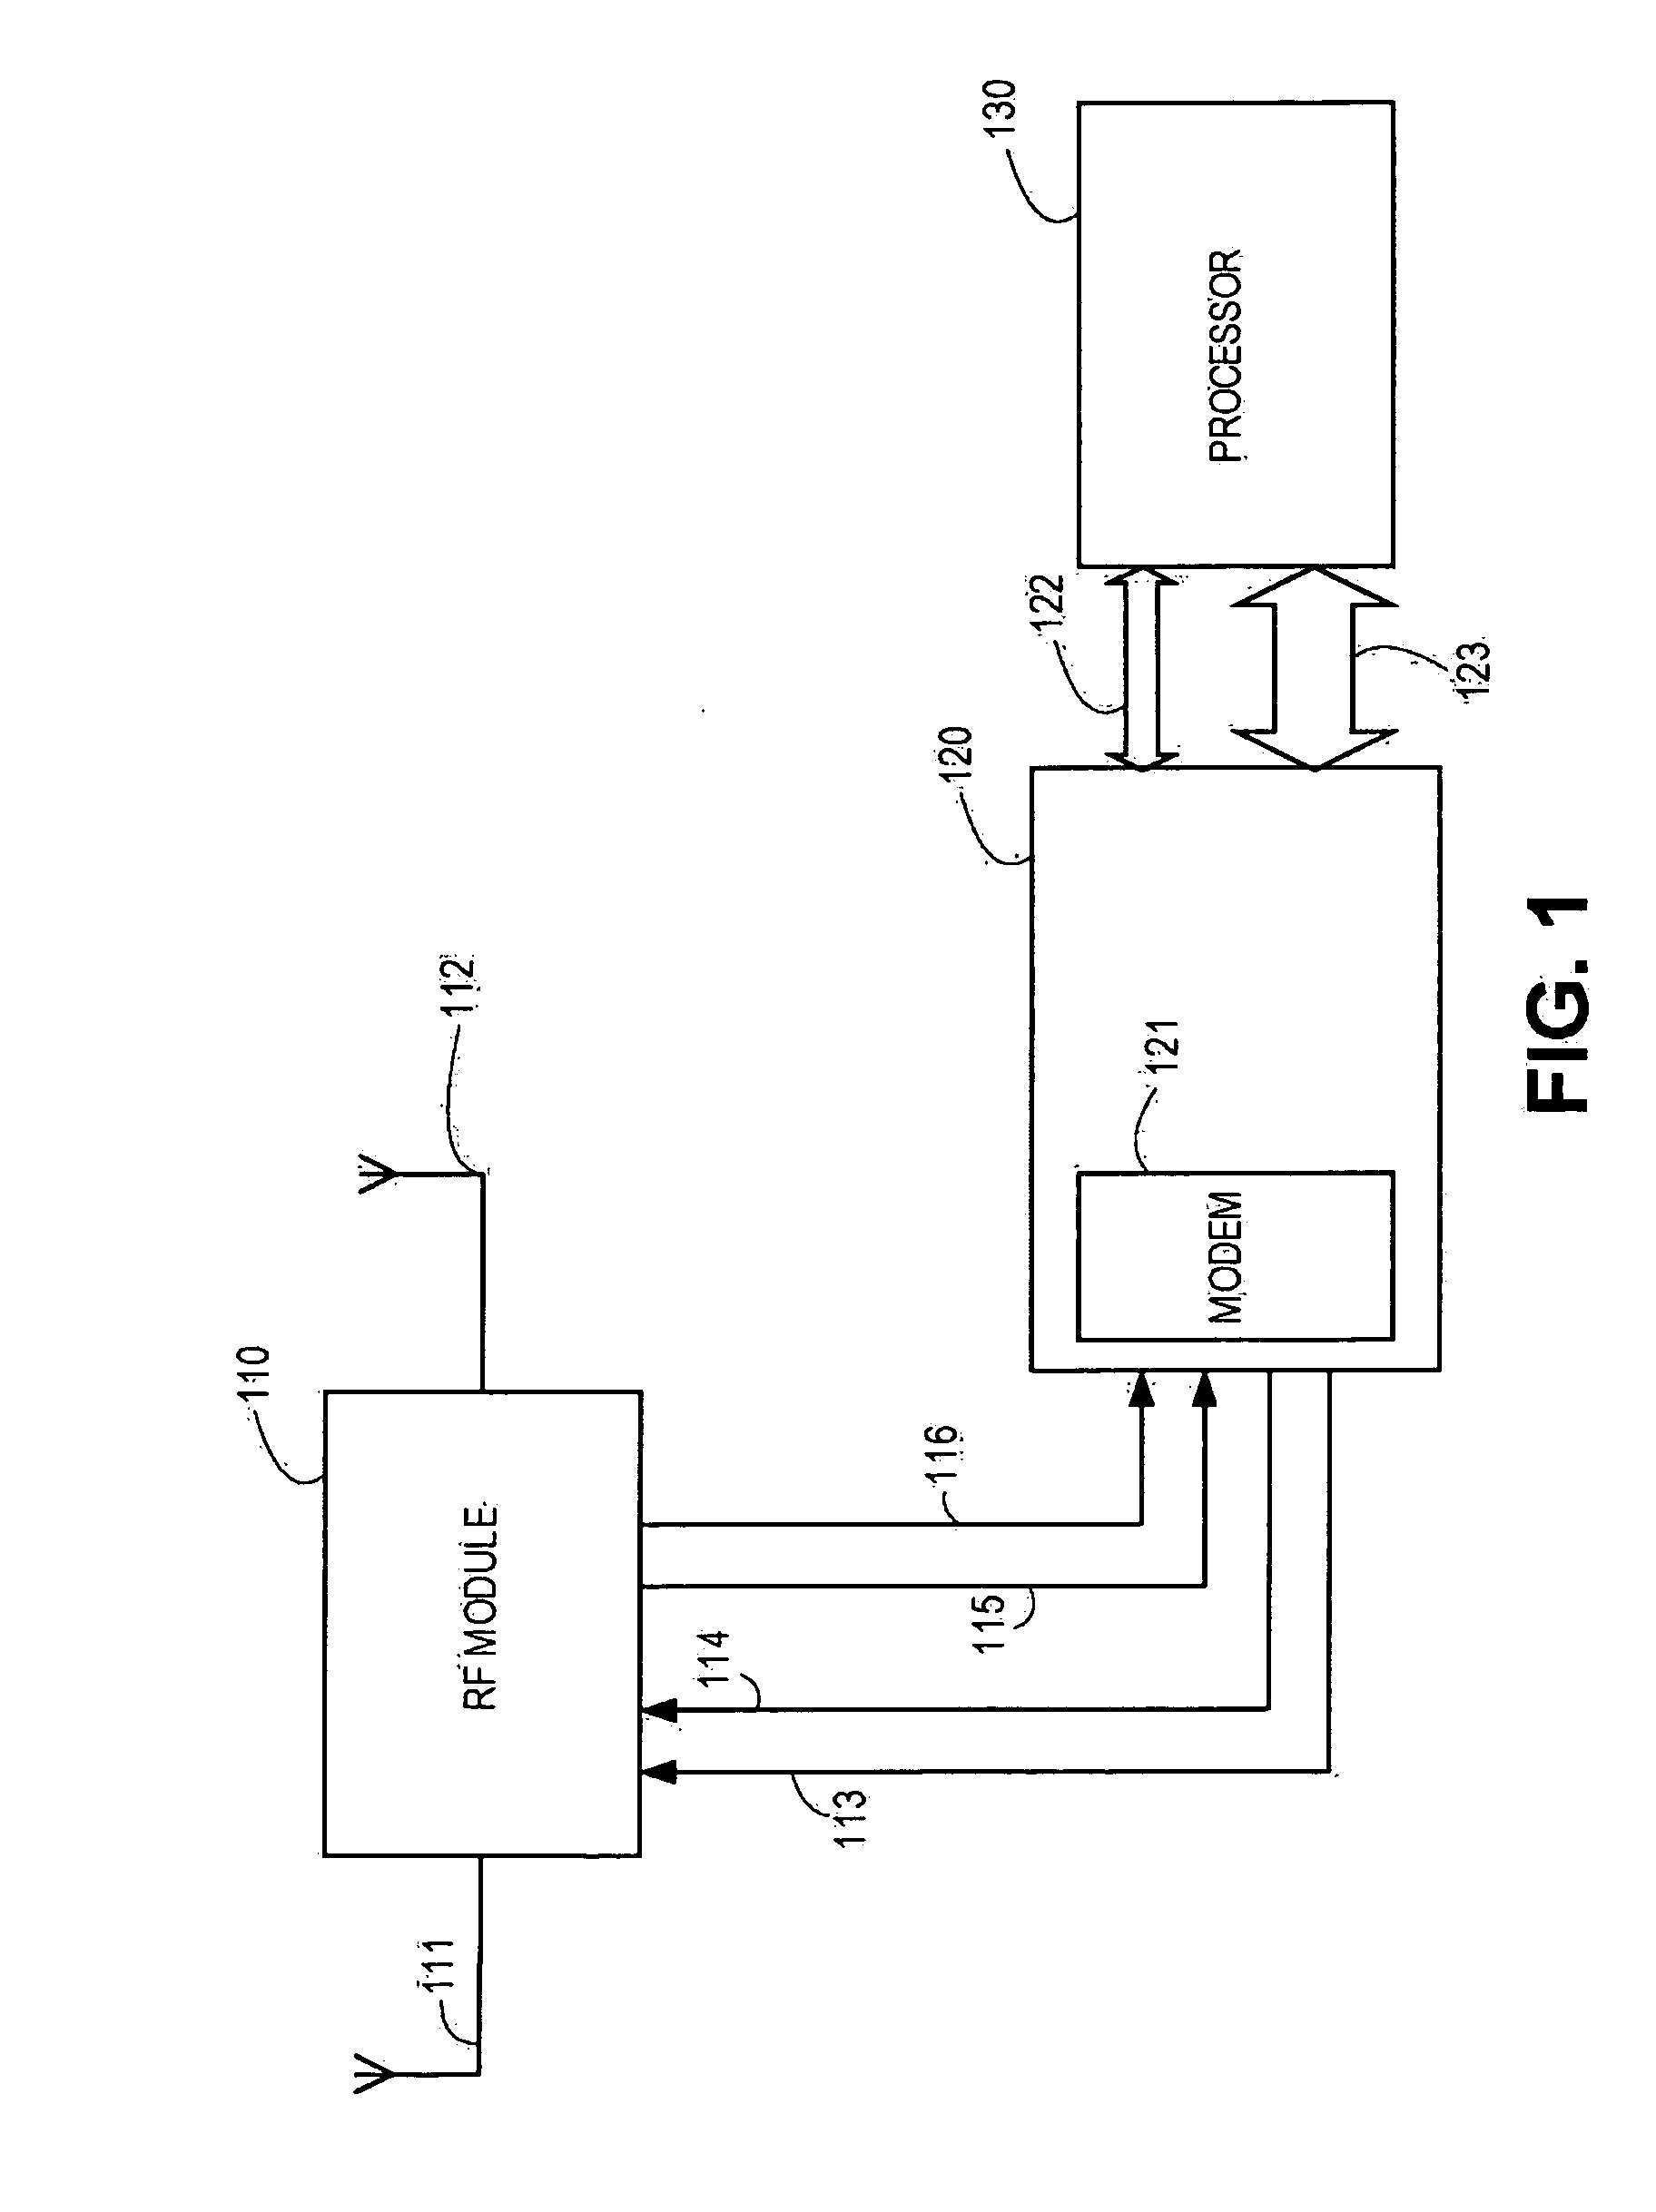 Frequency translating repeater with low cost high performance local oscillator architecture